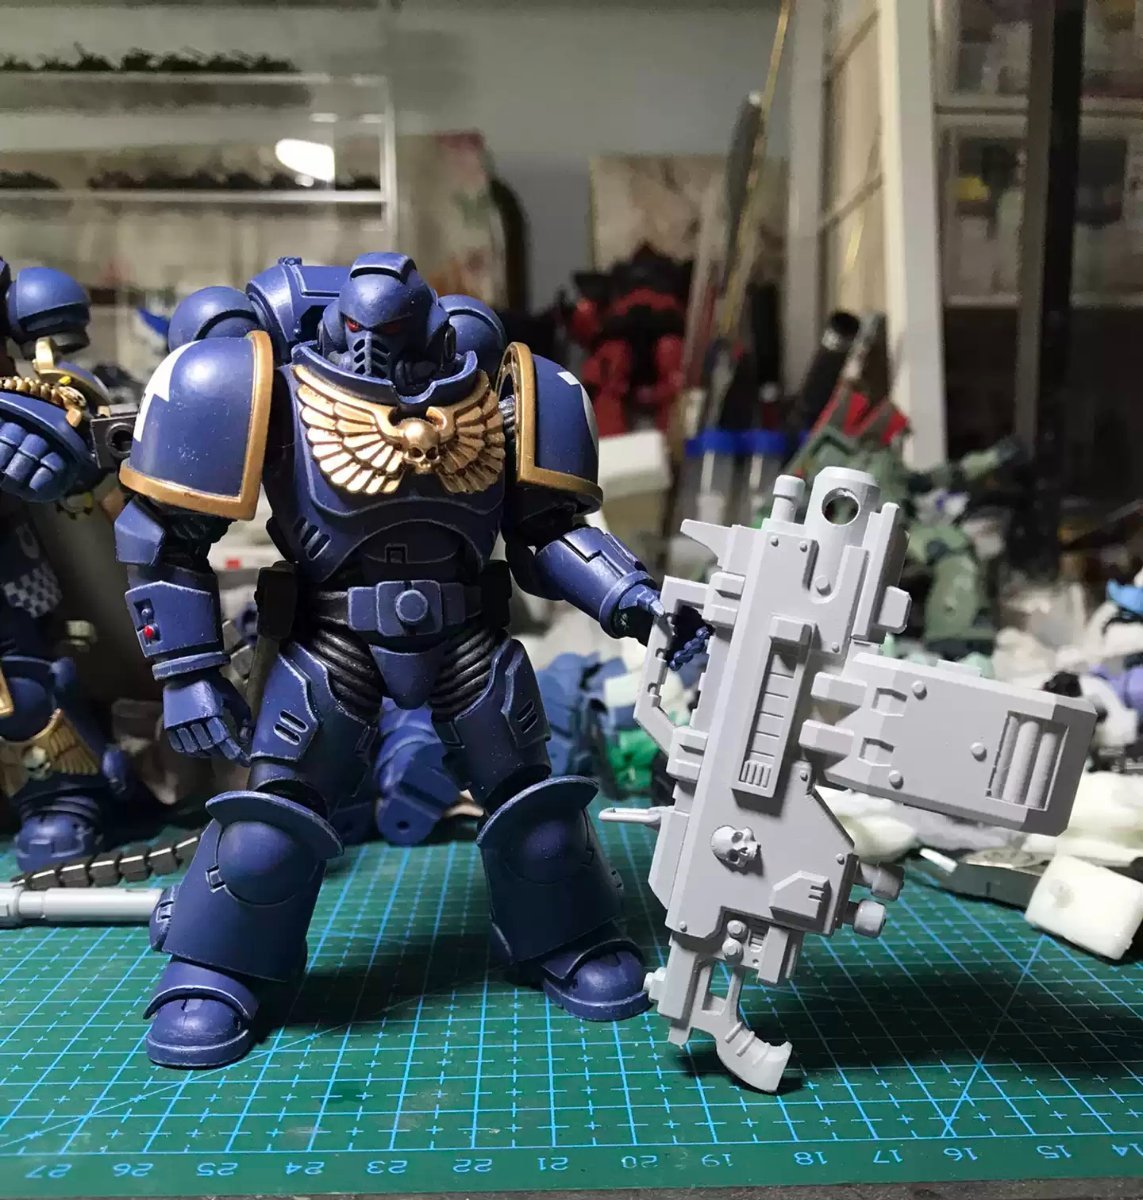 Warhammer 40K 1:18 Fire Squad Ultramarine Invader Weapon 3D Printed Model - + ADEPTUS ASTARTES Bolter and Chainsword